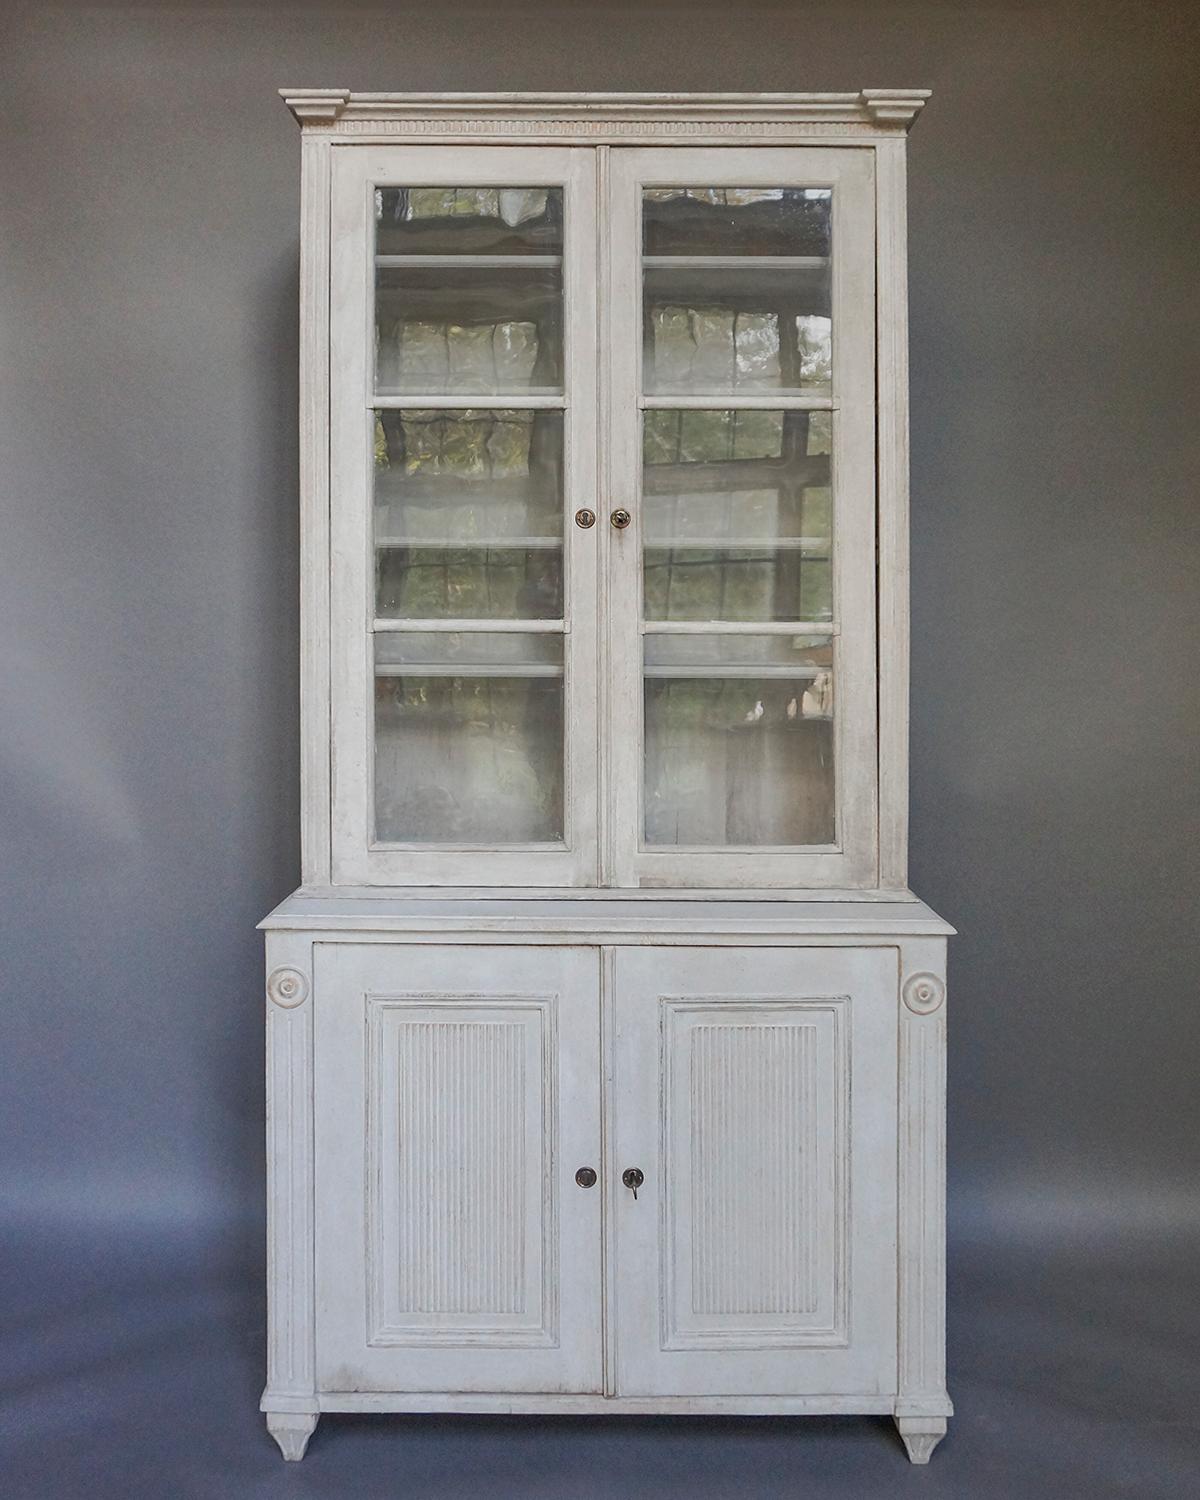 Two part cabinet in the Gustavian style, Sweden circa 1860. The upper section has a simple cornice with dentil molding and reeded corner posts. The double glazed doors open onto four fixed shelves. The lower section has a single shelf behind a pair